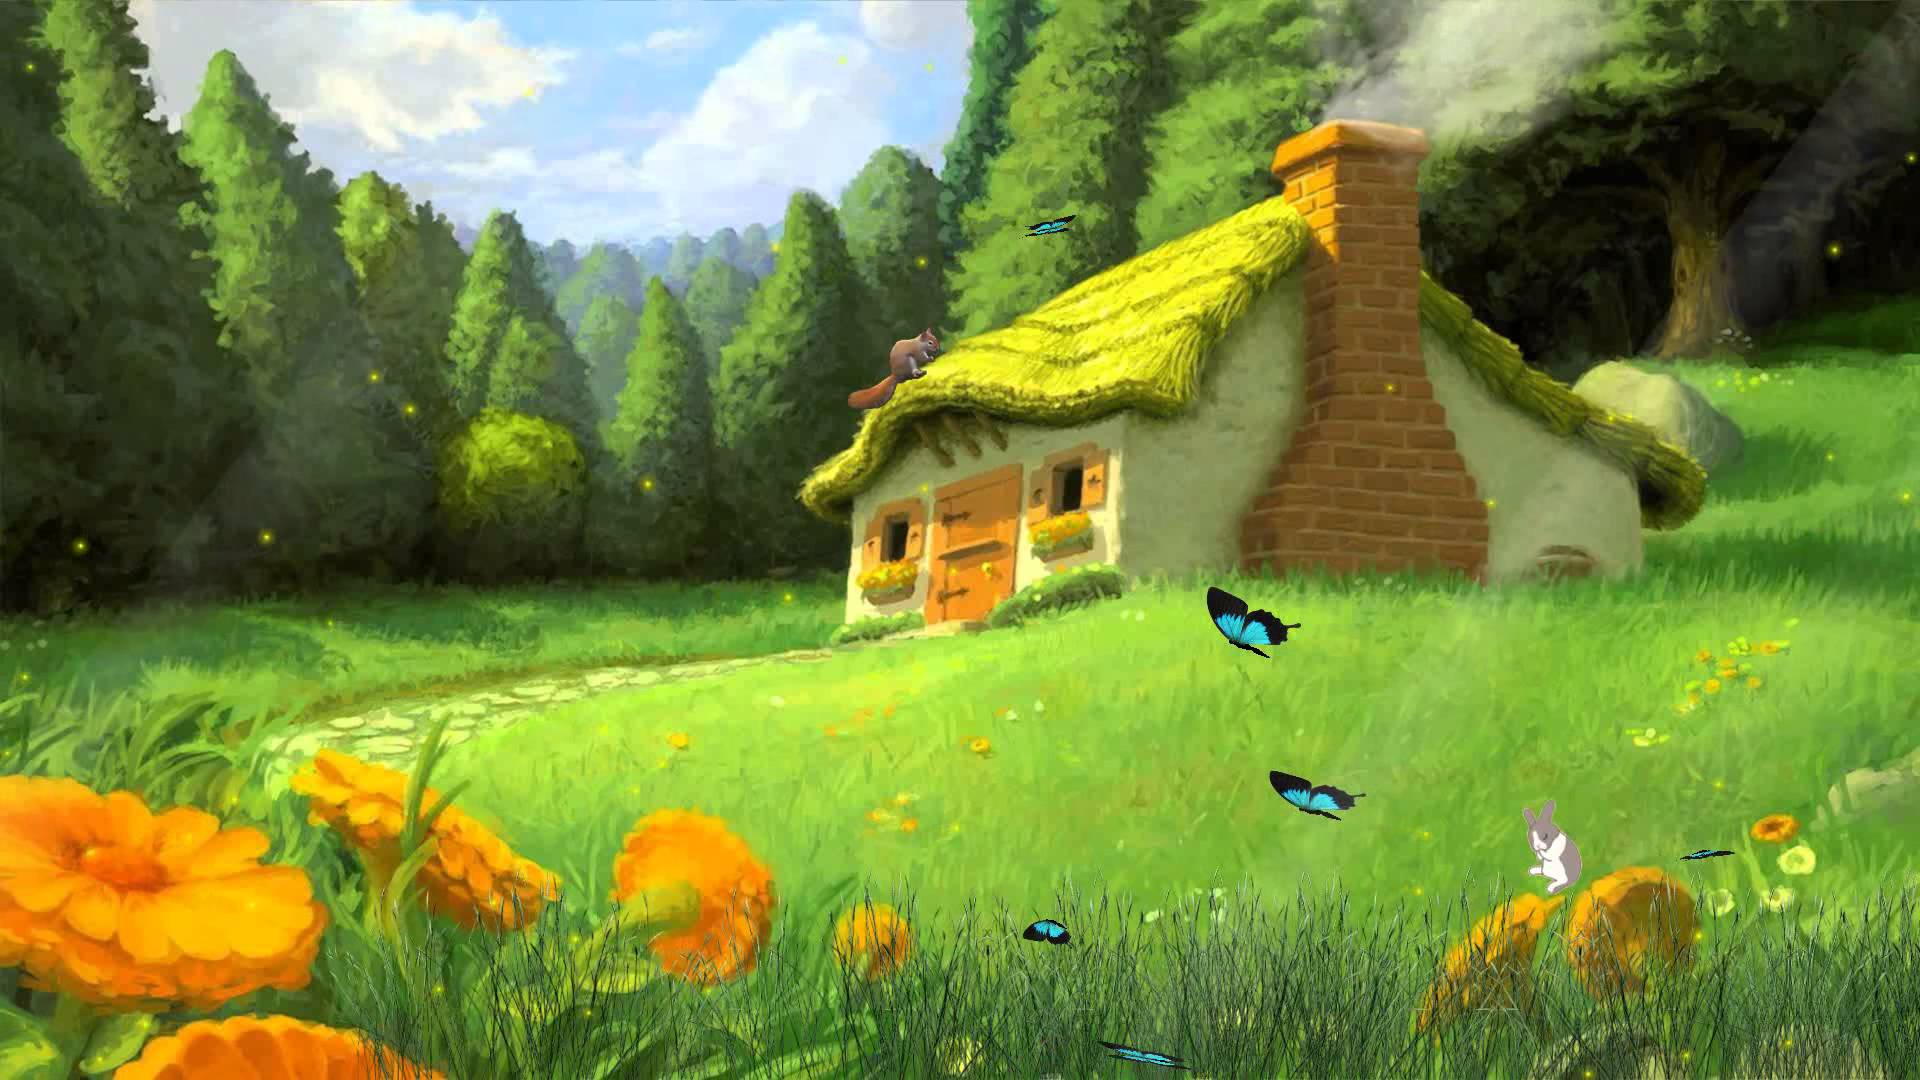 Tale Houses Animated Wallpaper